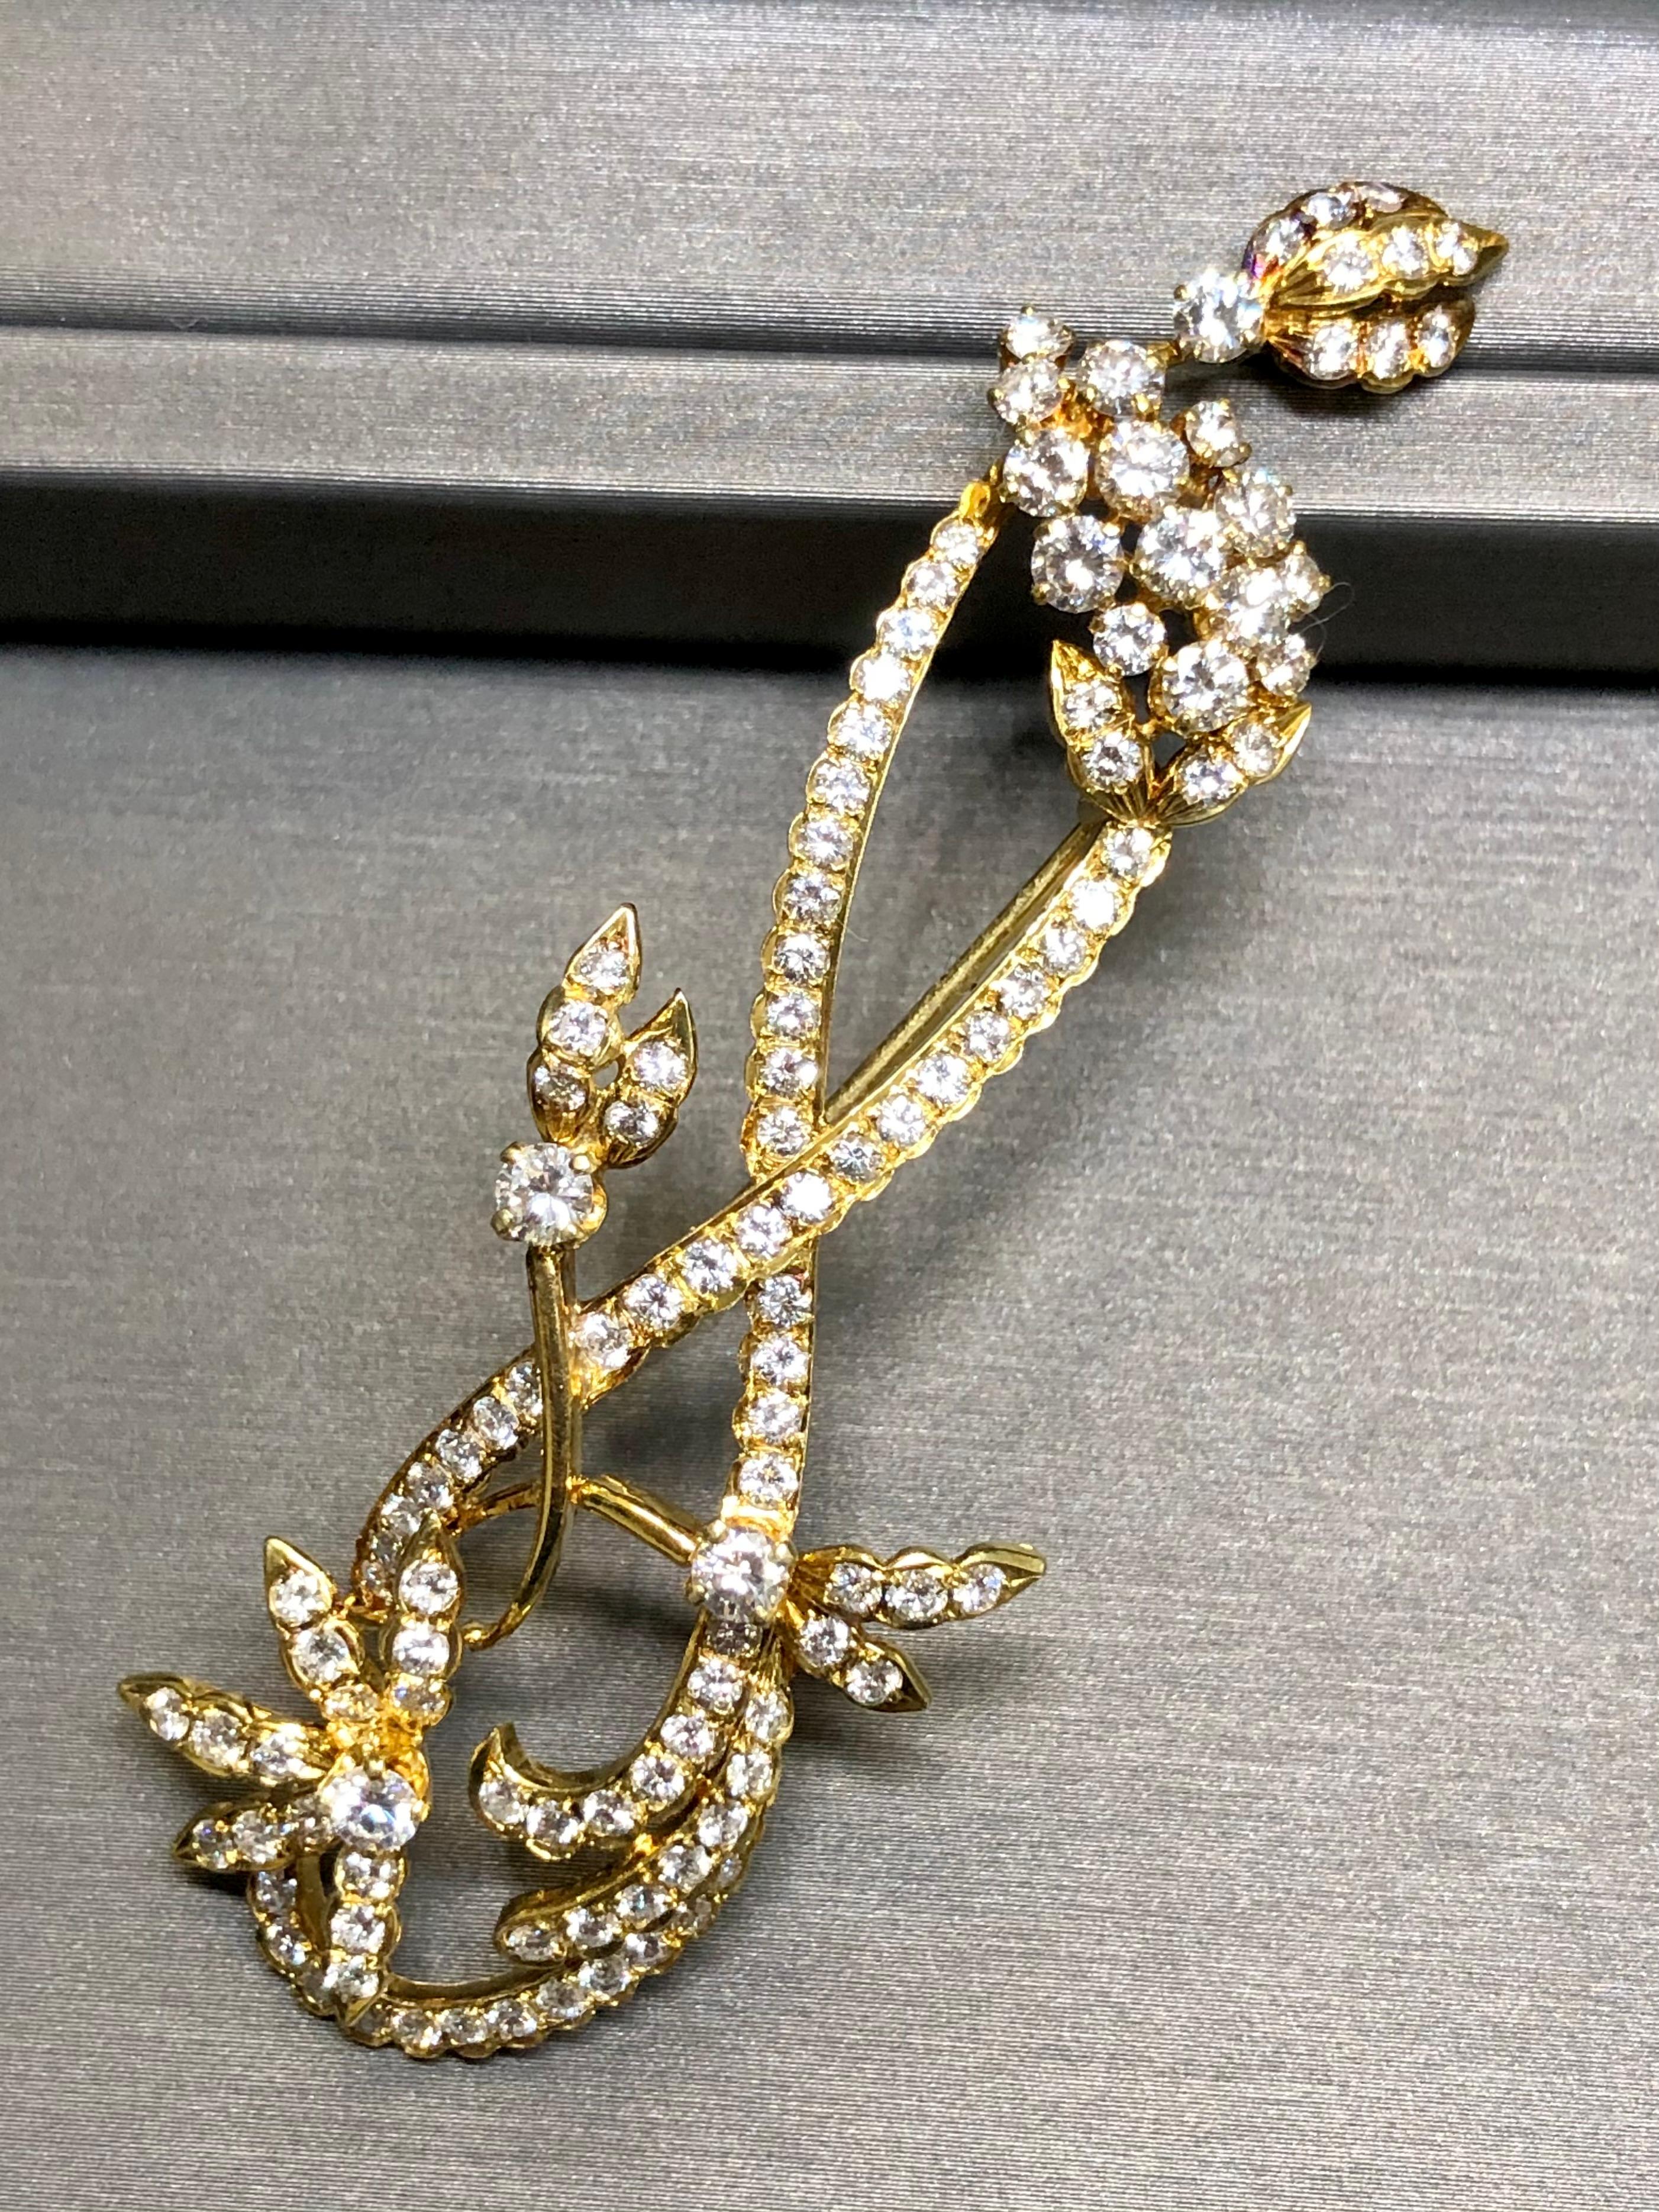 
A beautifully handmade brooch crafted in 14k yellow gold (18k wash for color) and set with collection quality diamonds. Total approximate diamond weight is 4.65cttw and all stones are G+ color and Vs1 clarity.


Dimensions/Weight:

Brooch measures